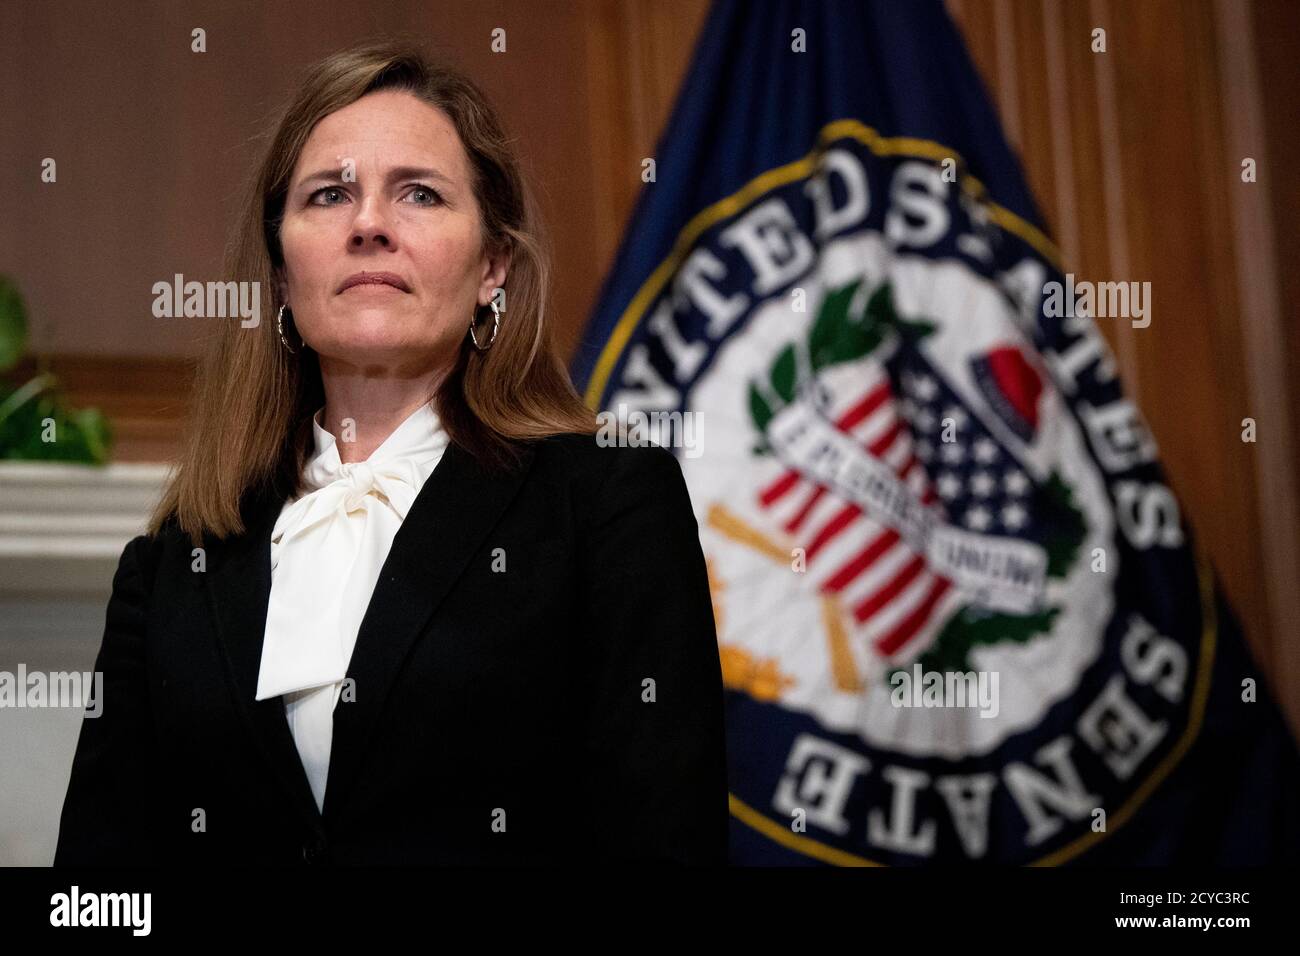 (201002) -- BEIJING, Oct. 2, 2020 (Xinhua) -- Photo taken on Oct. 1, 2020 shows Amy Coney Barrett in Washington, DC, the United States. U.S. President Donald Trump has nominated conservative federal appellate judge Amy Coney Barrett to fill the late U.S. Supreme Court Justice Ruth Bader Ginsburg's seat. Barrett, who sits on the 7th Circuit Court of Appeals in Chicago, met with Republican senators on Capitol Hill on Sept. 29, as her confirmation process is underway. (Caroline Brehman/Pool via Xinhua) Stock Photo